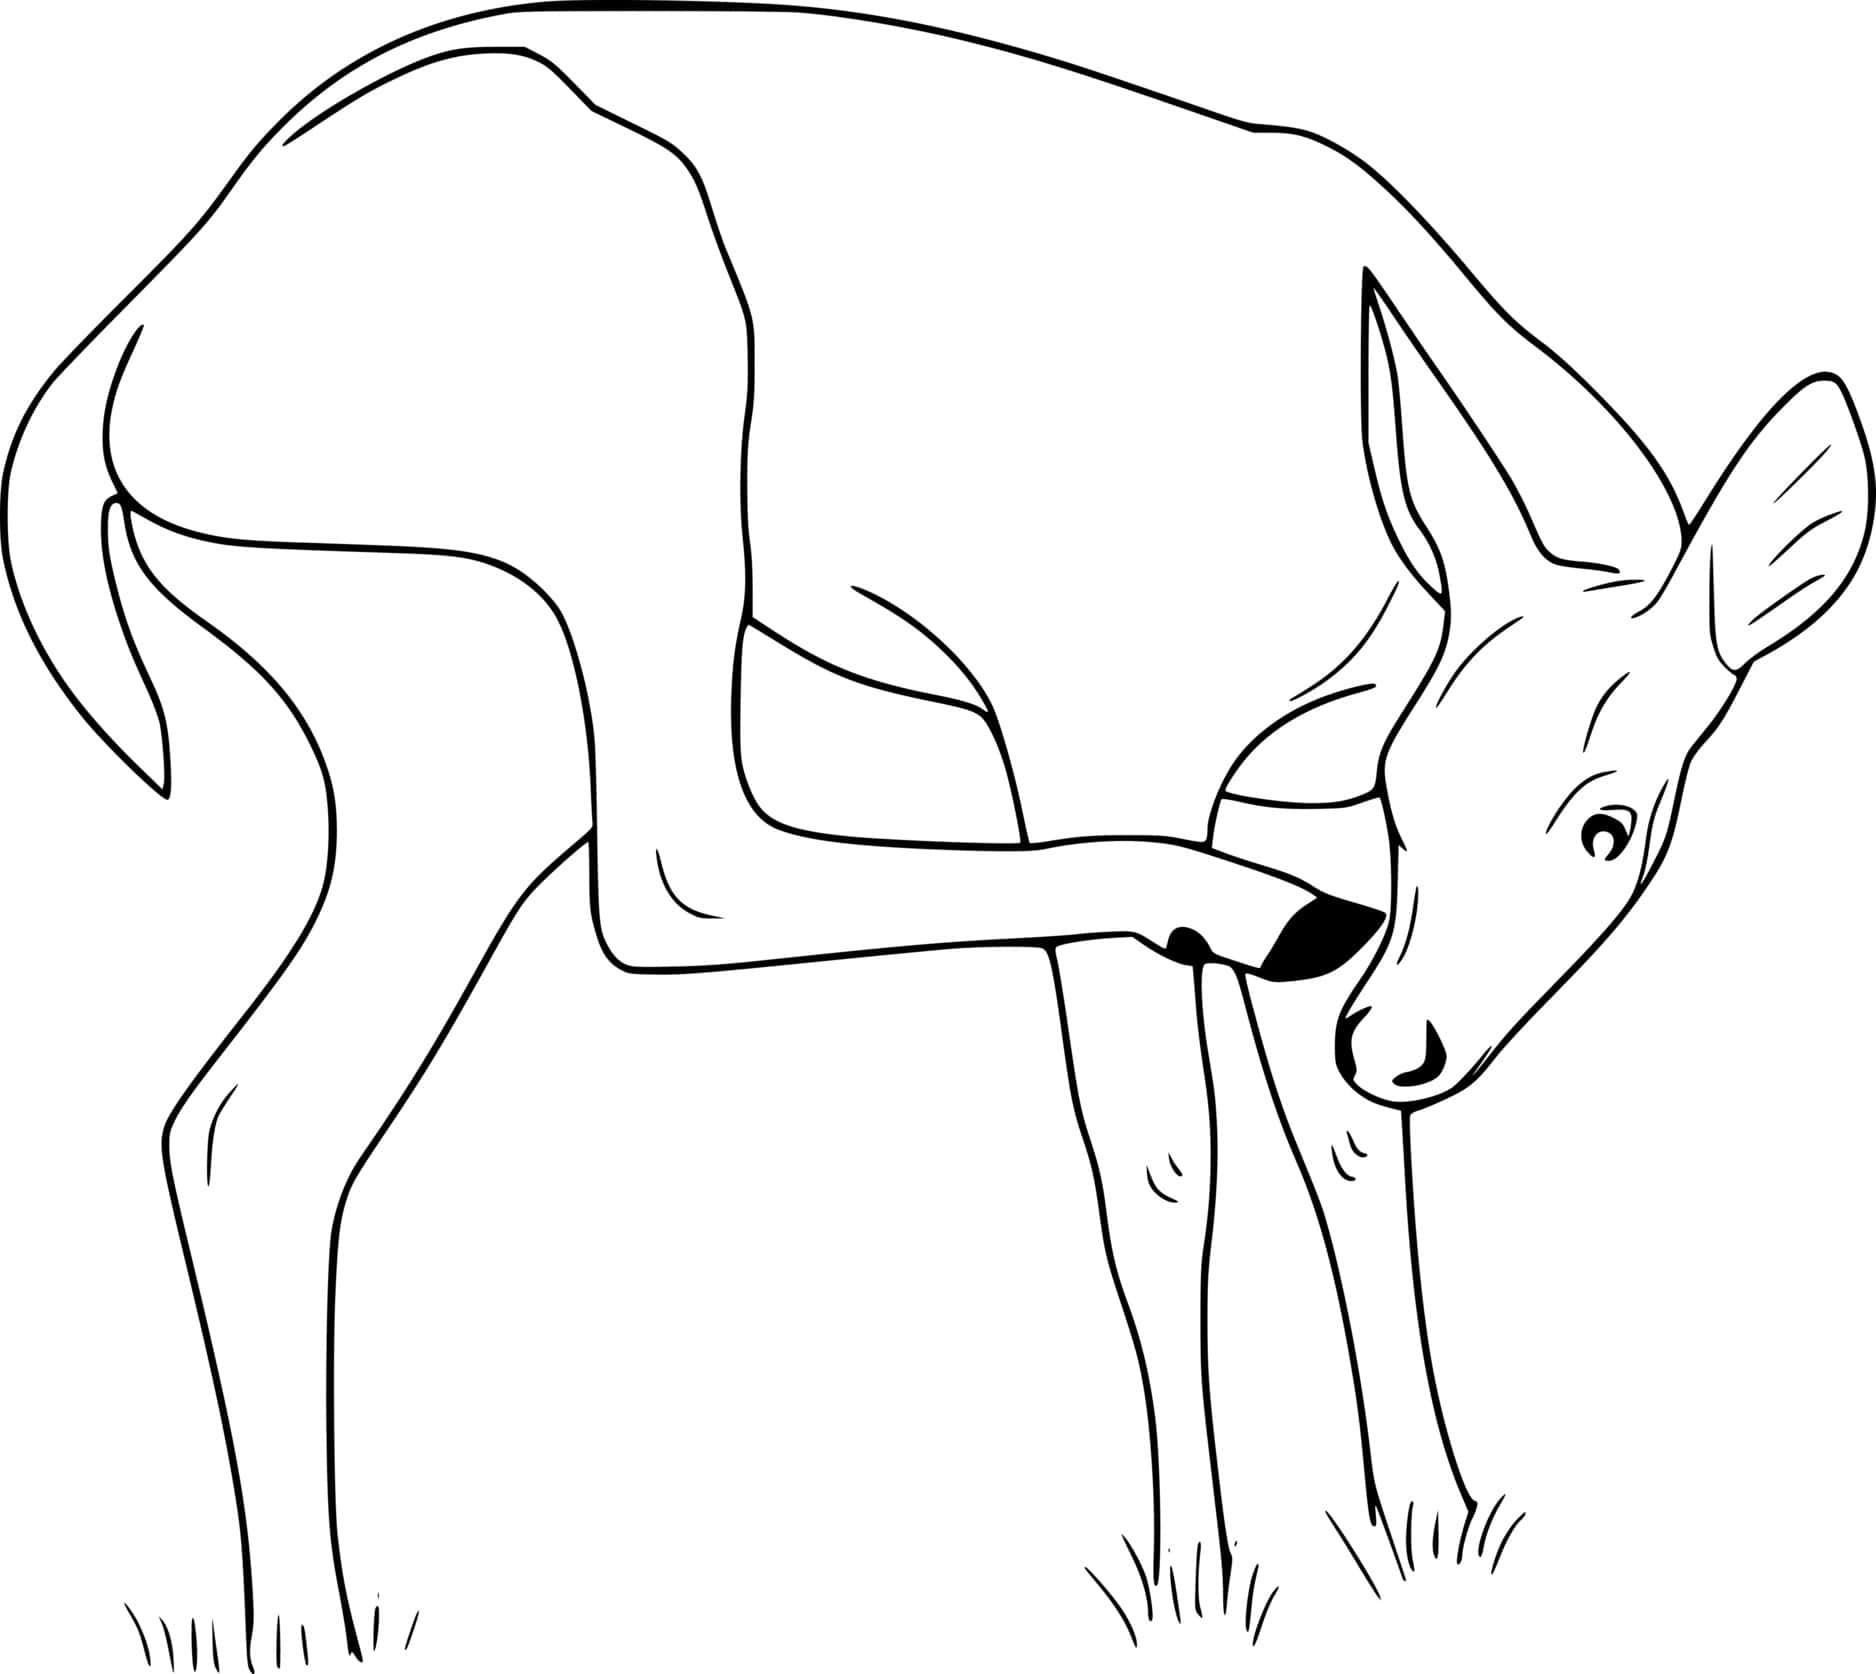 Deer Eating Grass Coloring Page